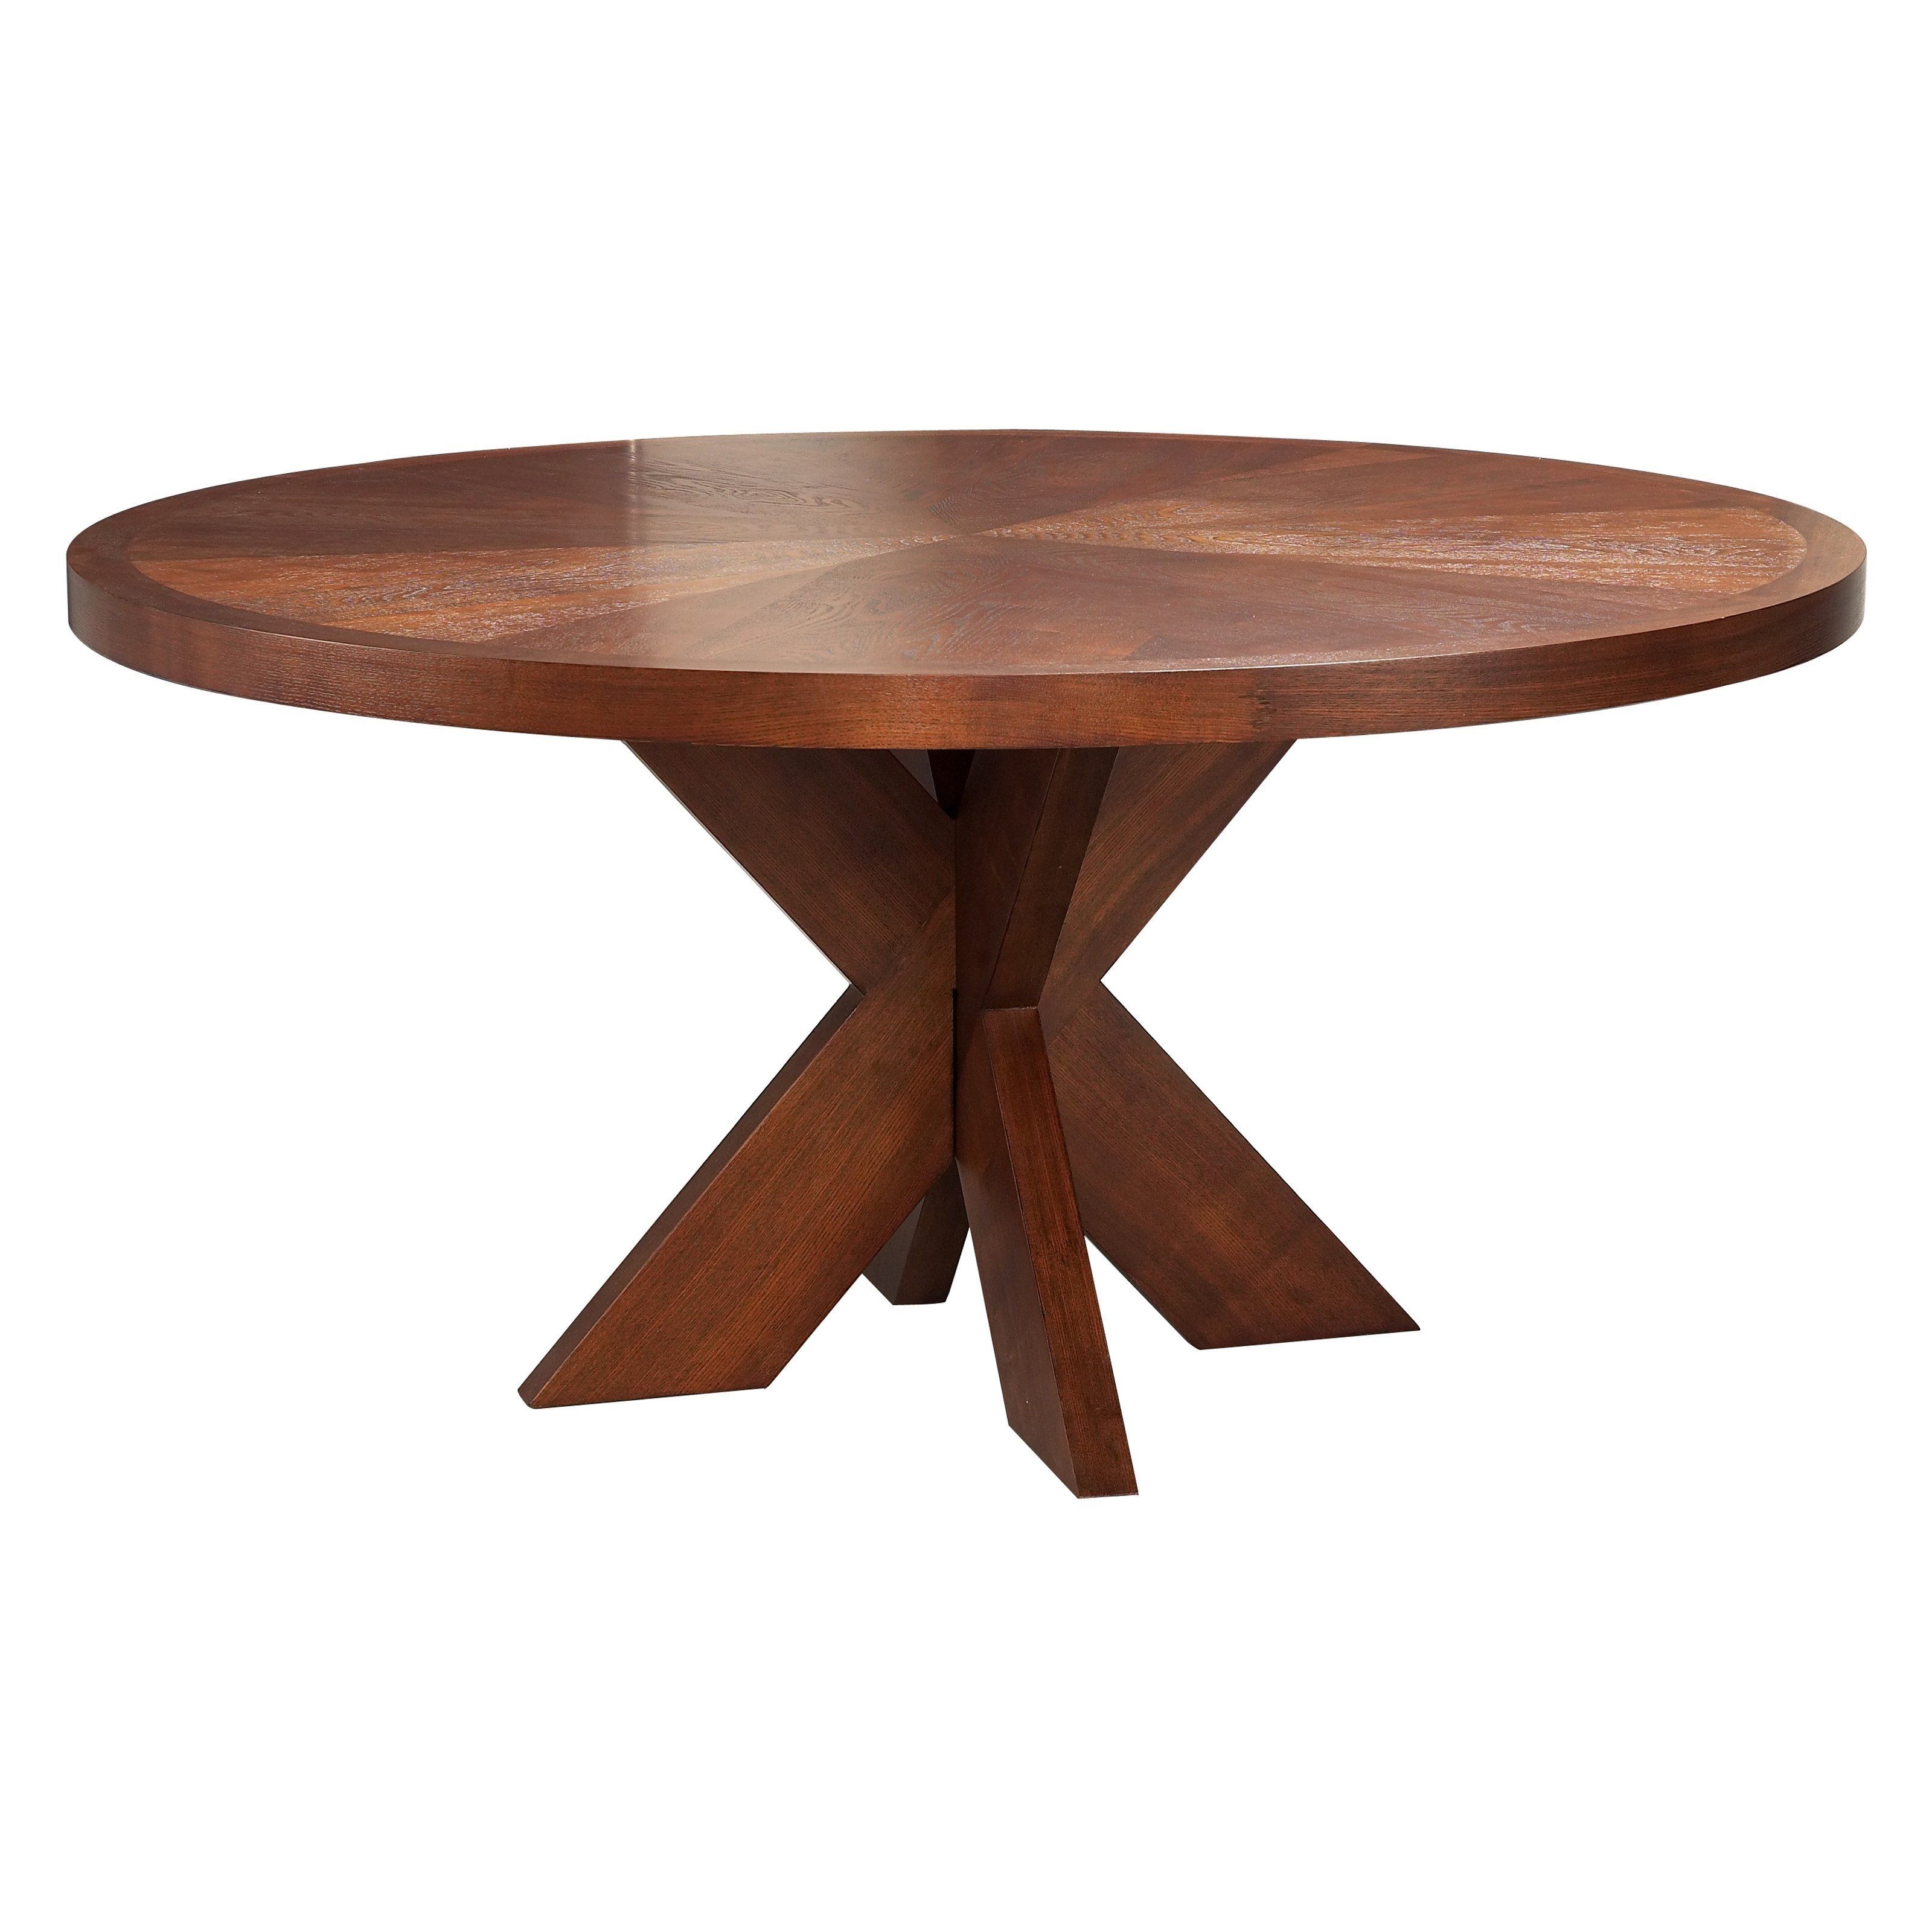 Hudson Round Dining Tables Within Favorite Have To Have It. Hudson Round X Base Dining Table – Mocha $415.98 (Photo 5 of 25)